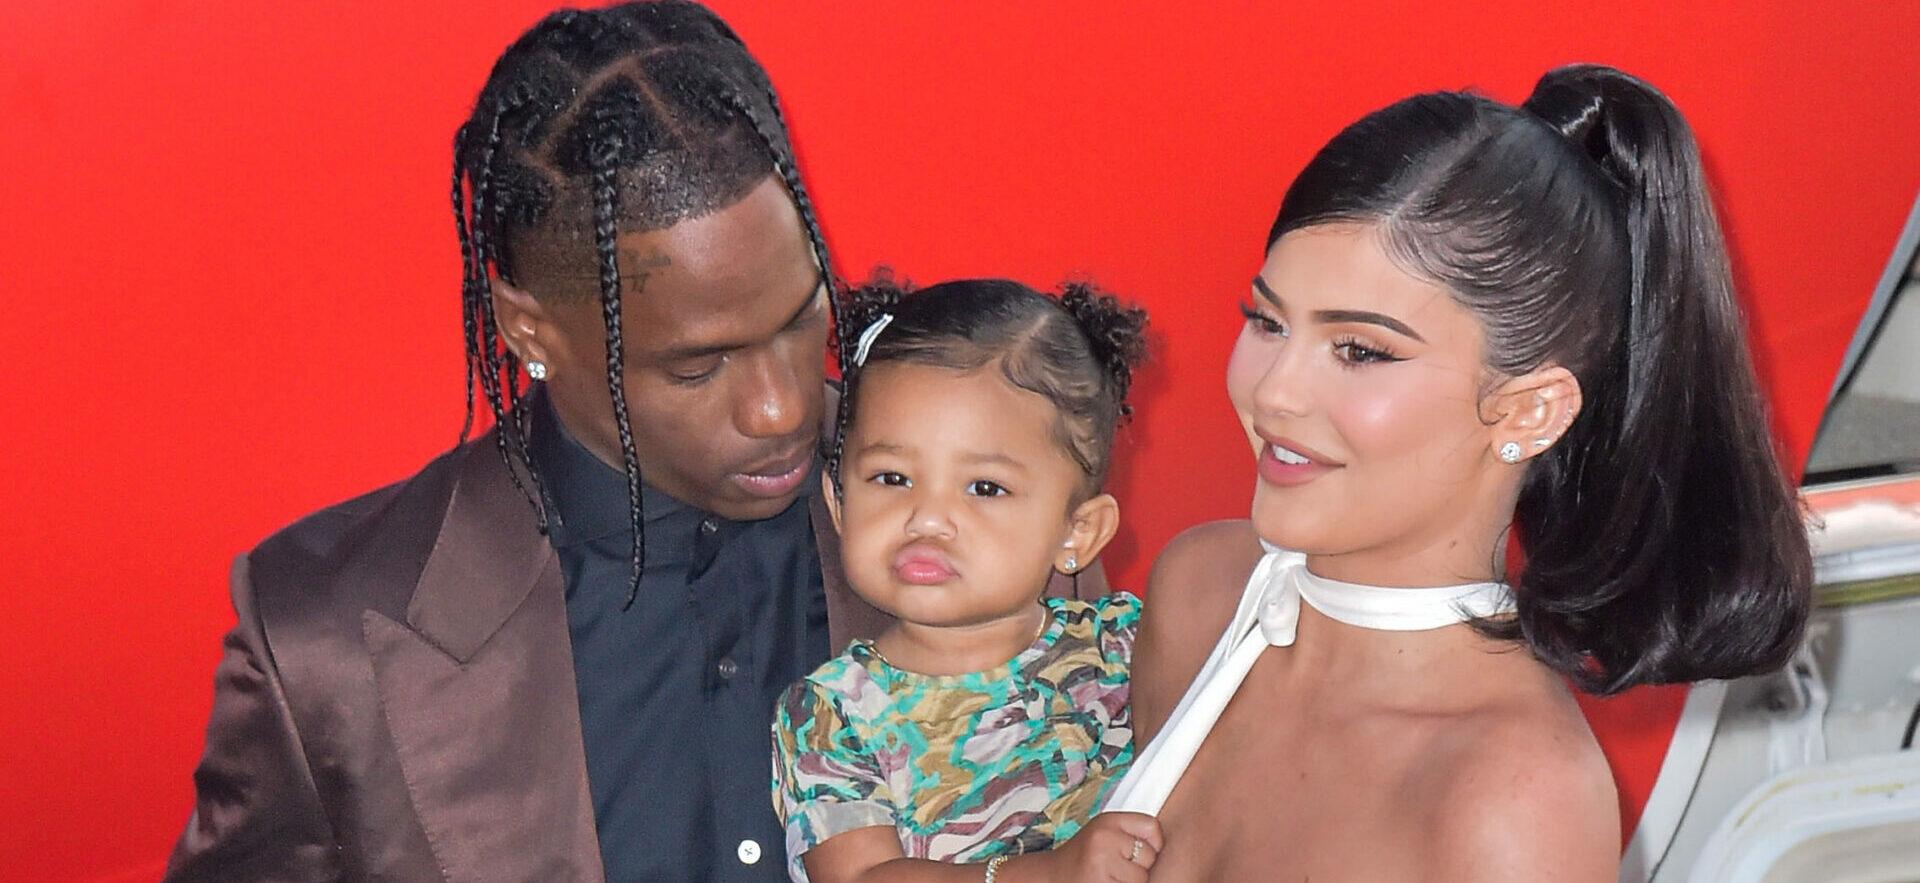 Kylie Jenner Gives Birth To Baby #2 With Travis Scott!